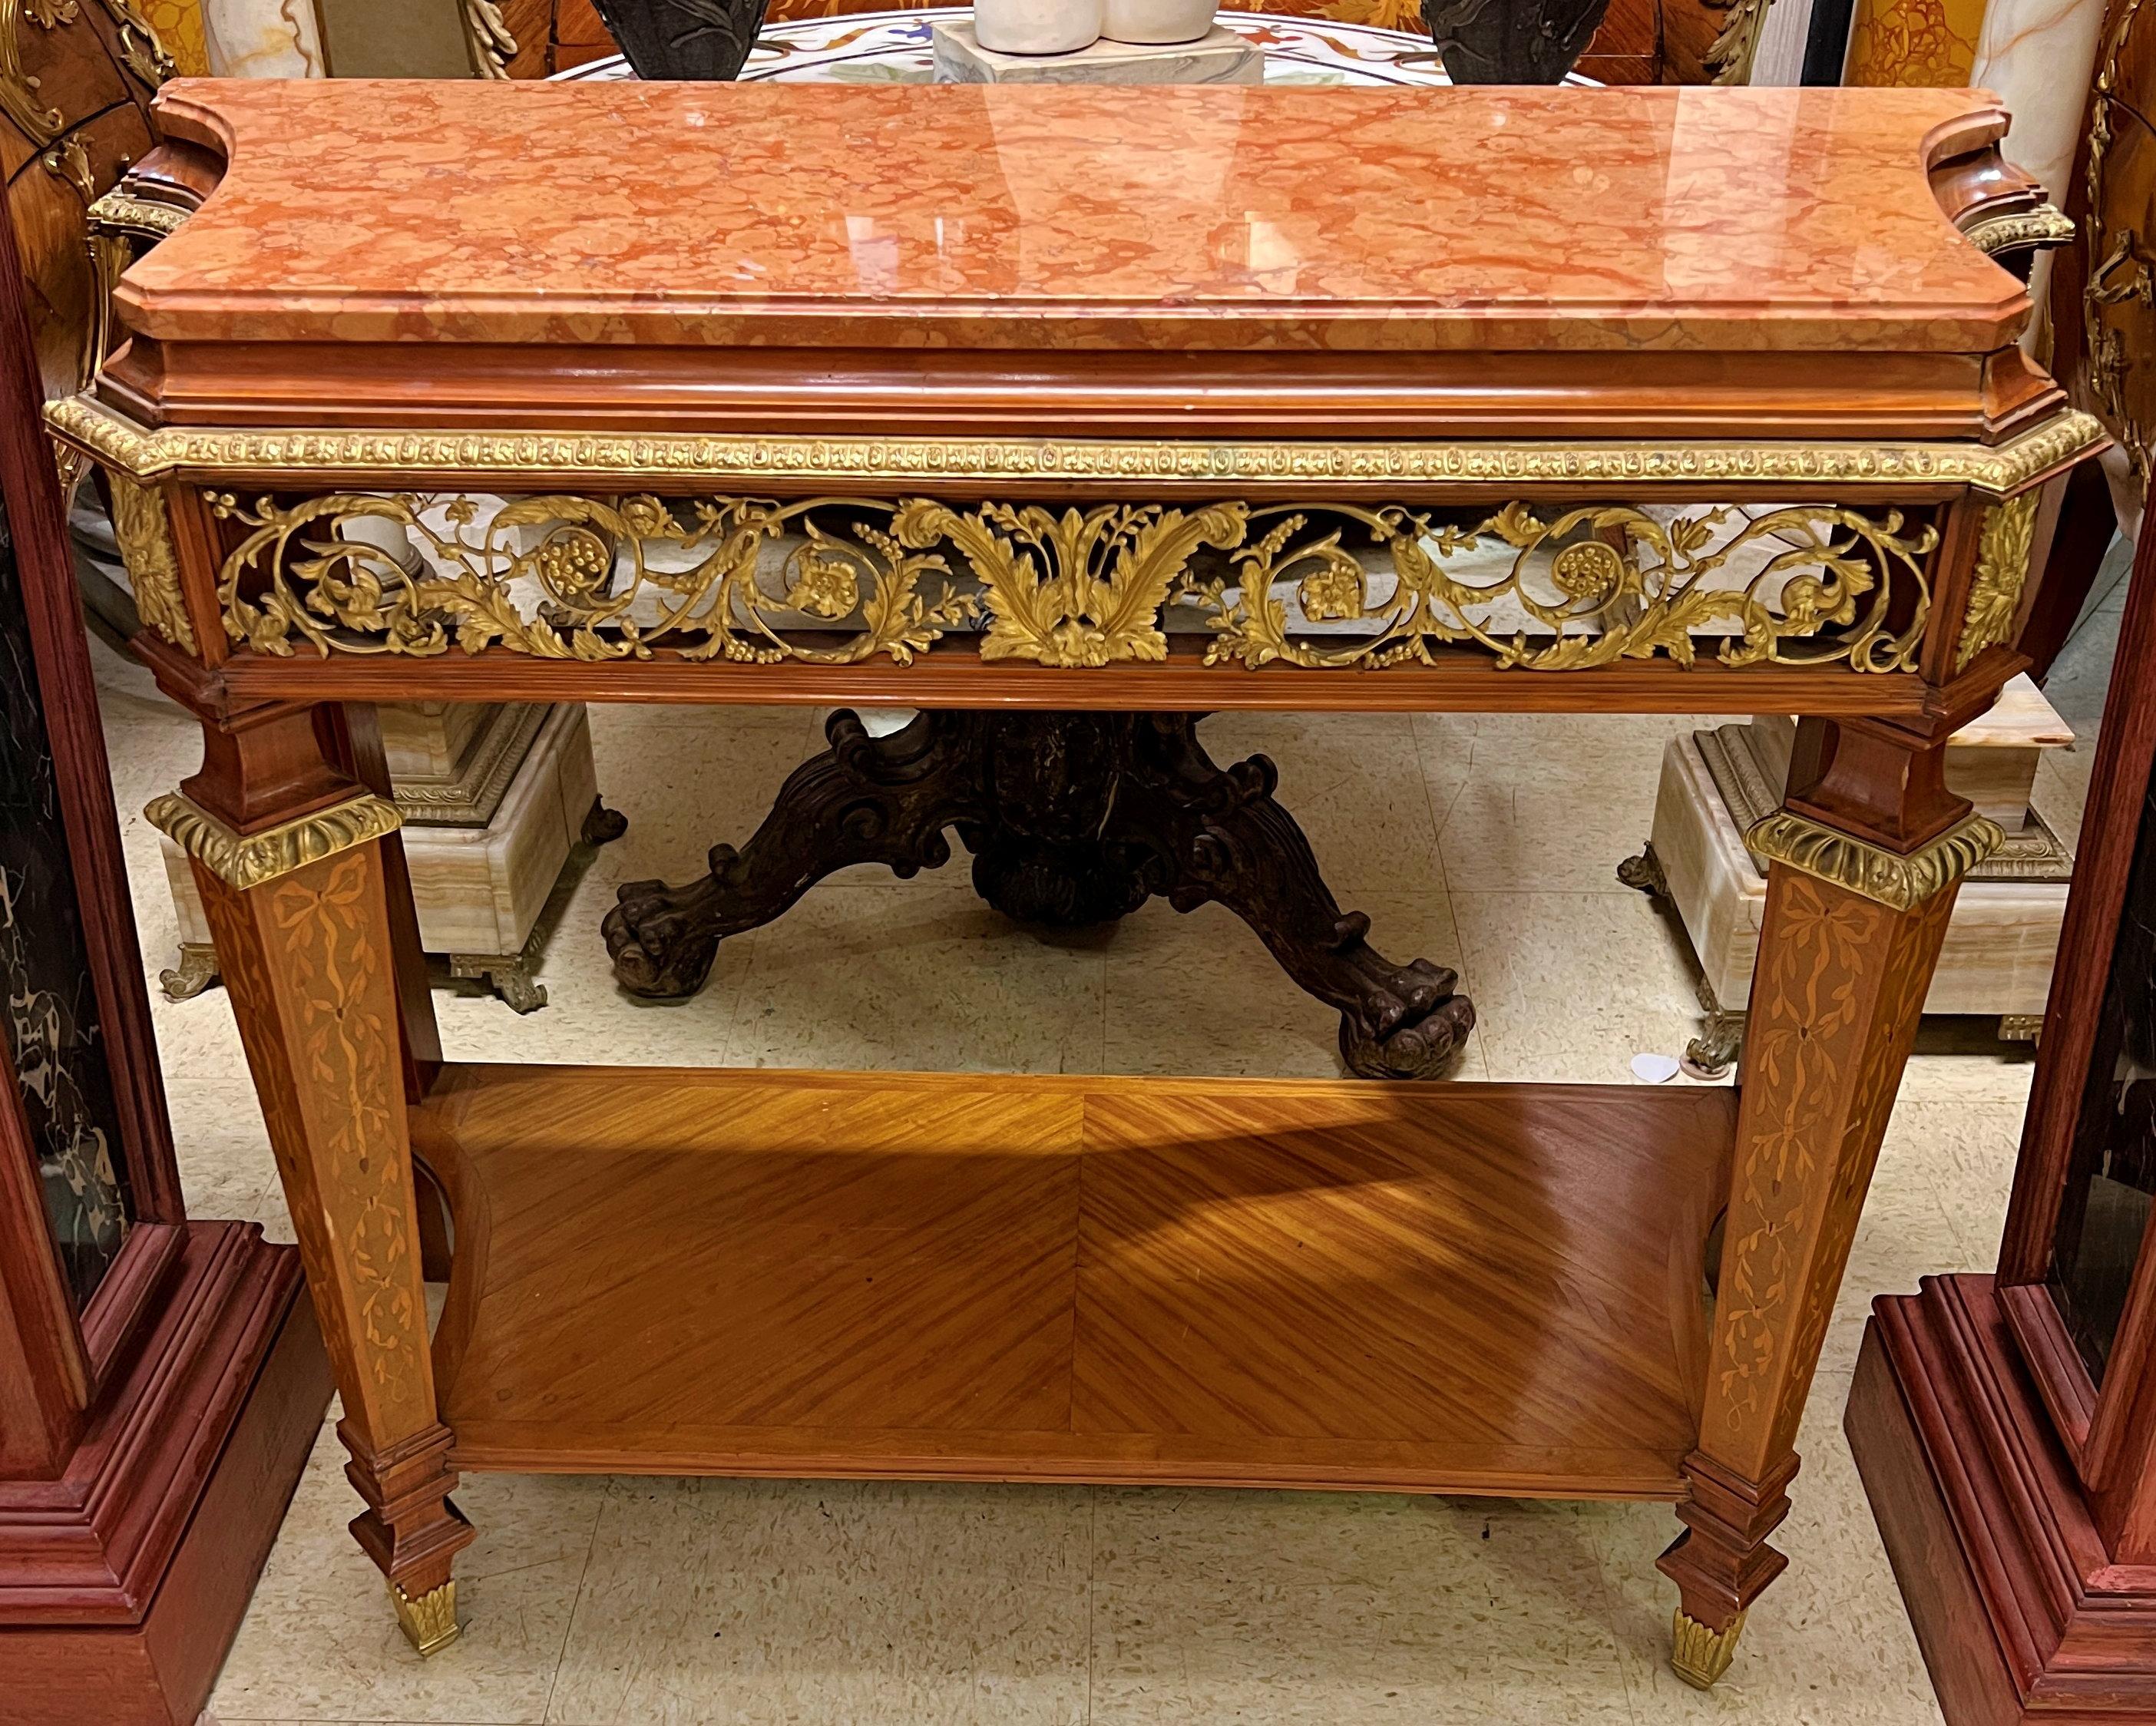 Very fine quality French Louis XVI Style gilt bronze mounted marble top Console Table by Ameublement Forest of Paris.
    